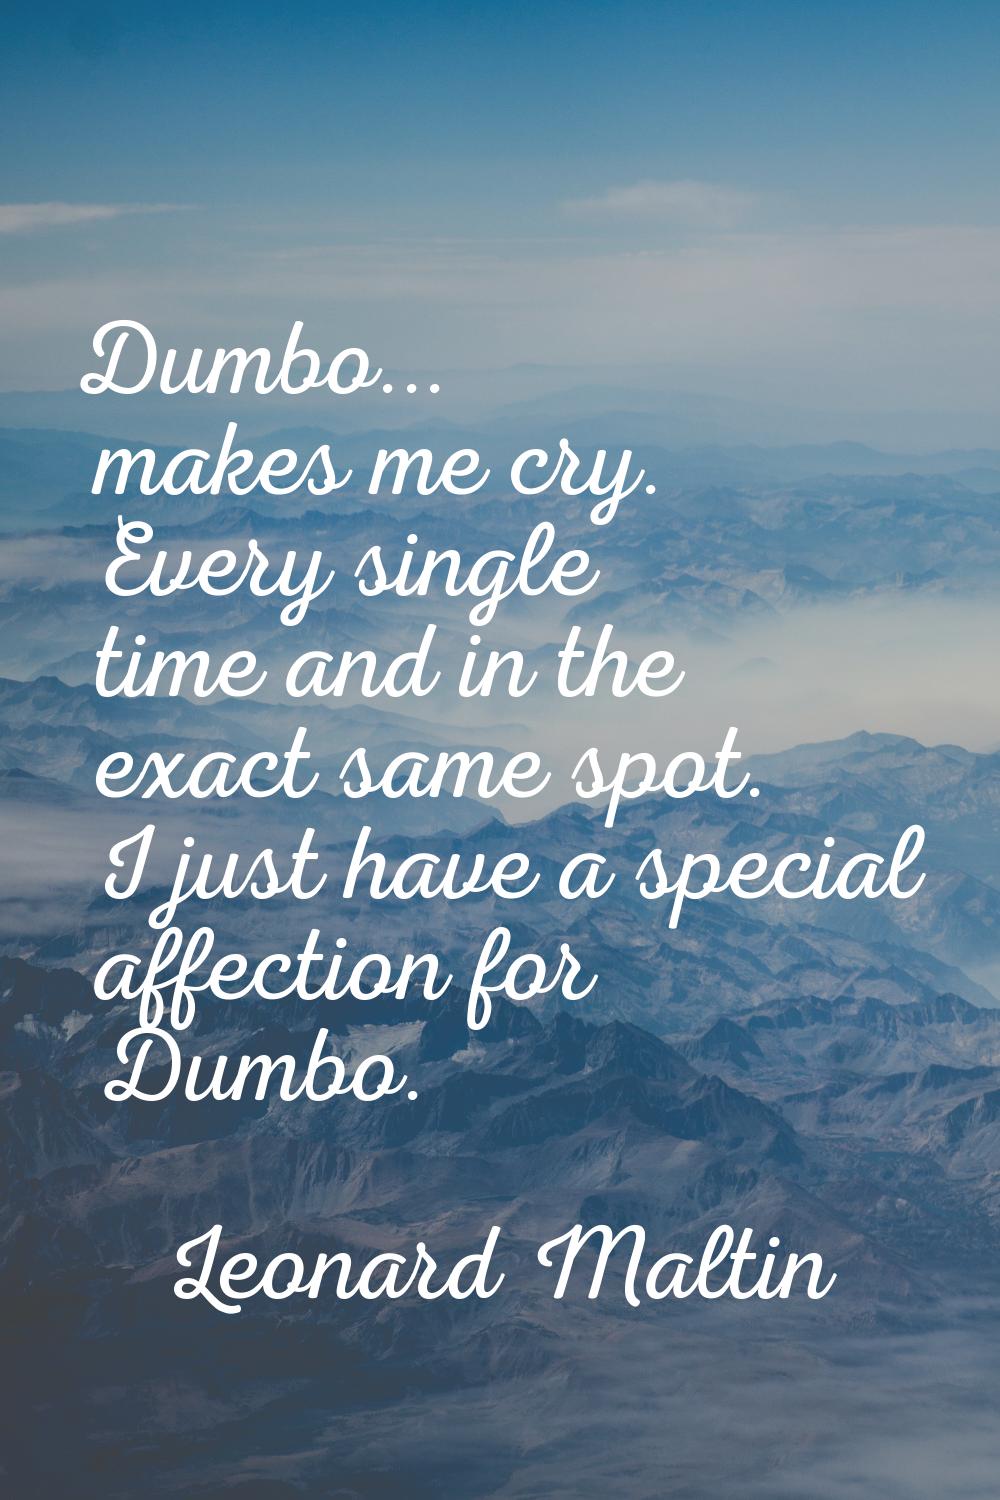 Dumbo... makes me cry. Every single time and in the exact same spot. I just have a special affectio